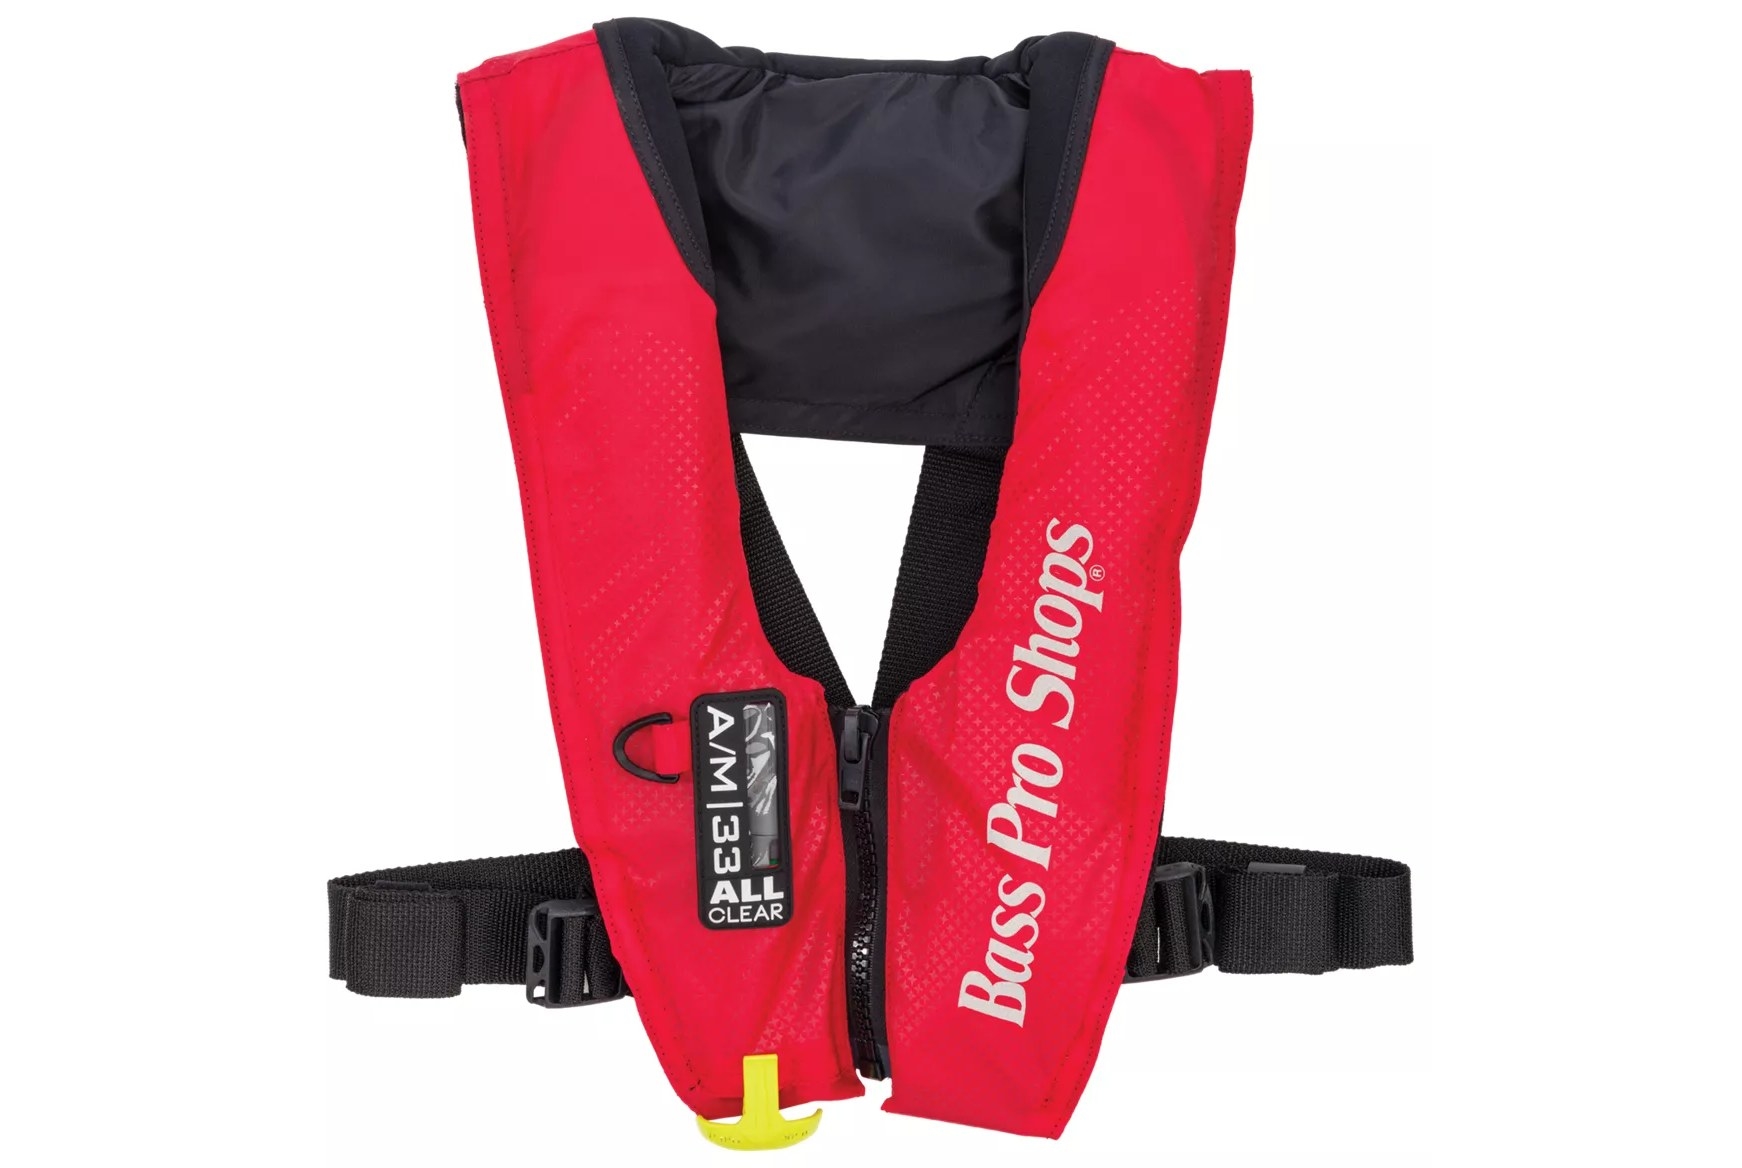 the red lifejacket